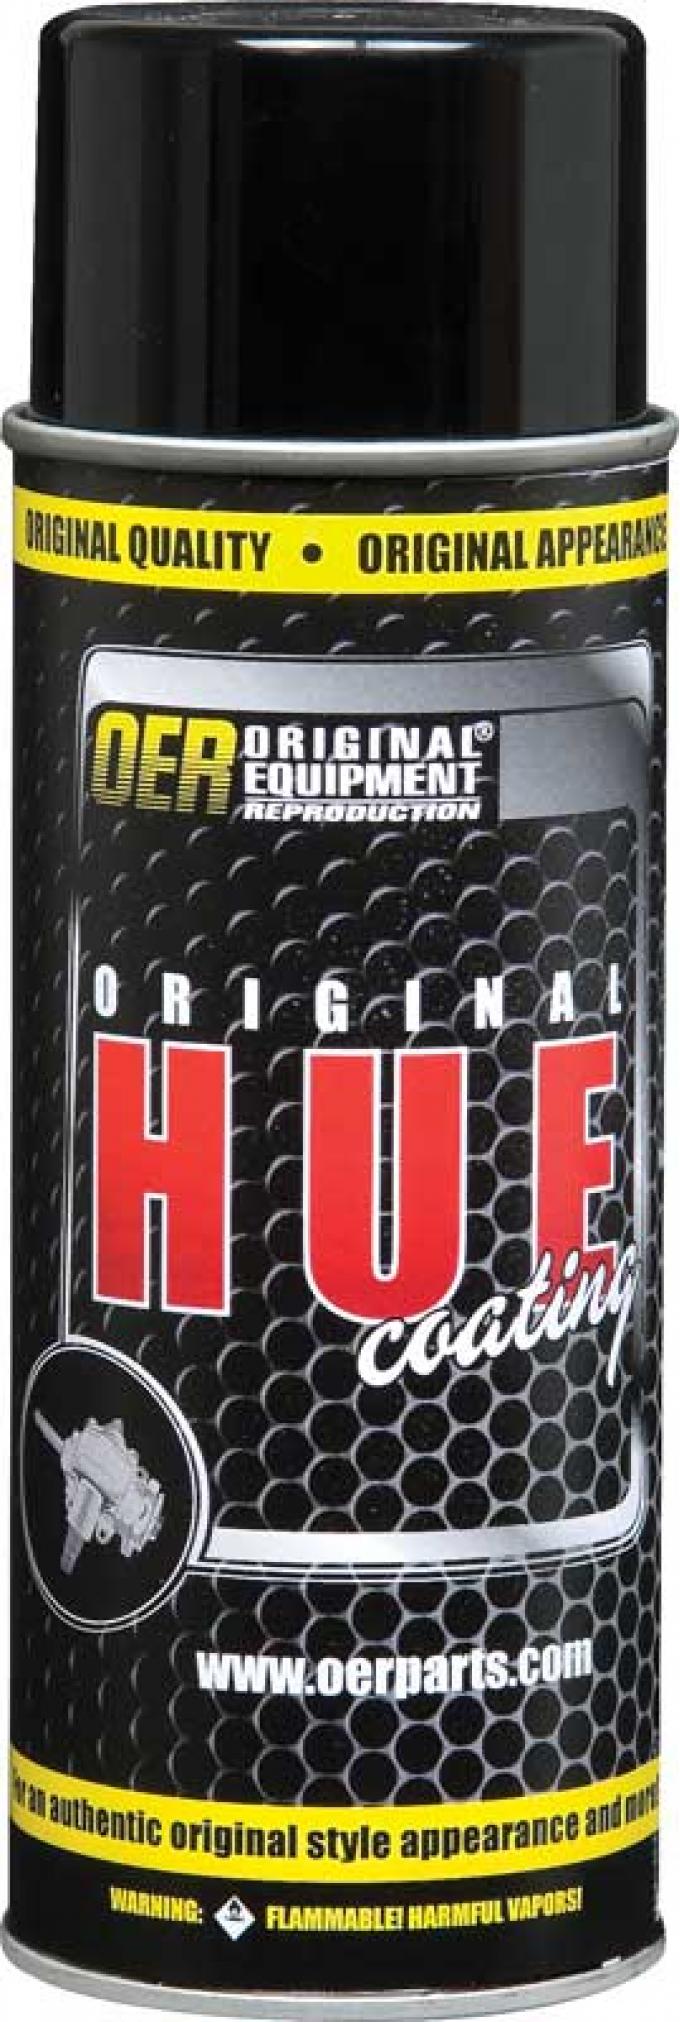 OER Gray "Original Hue" Paint For Delco Shock Absorbers 16 Oz Can K89532